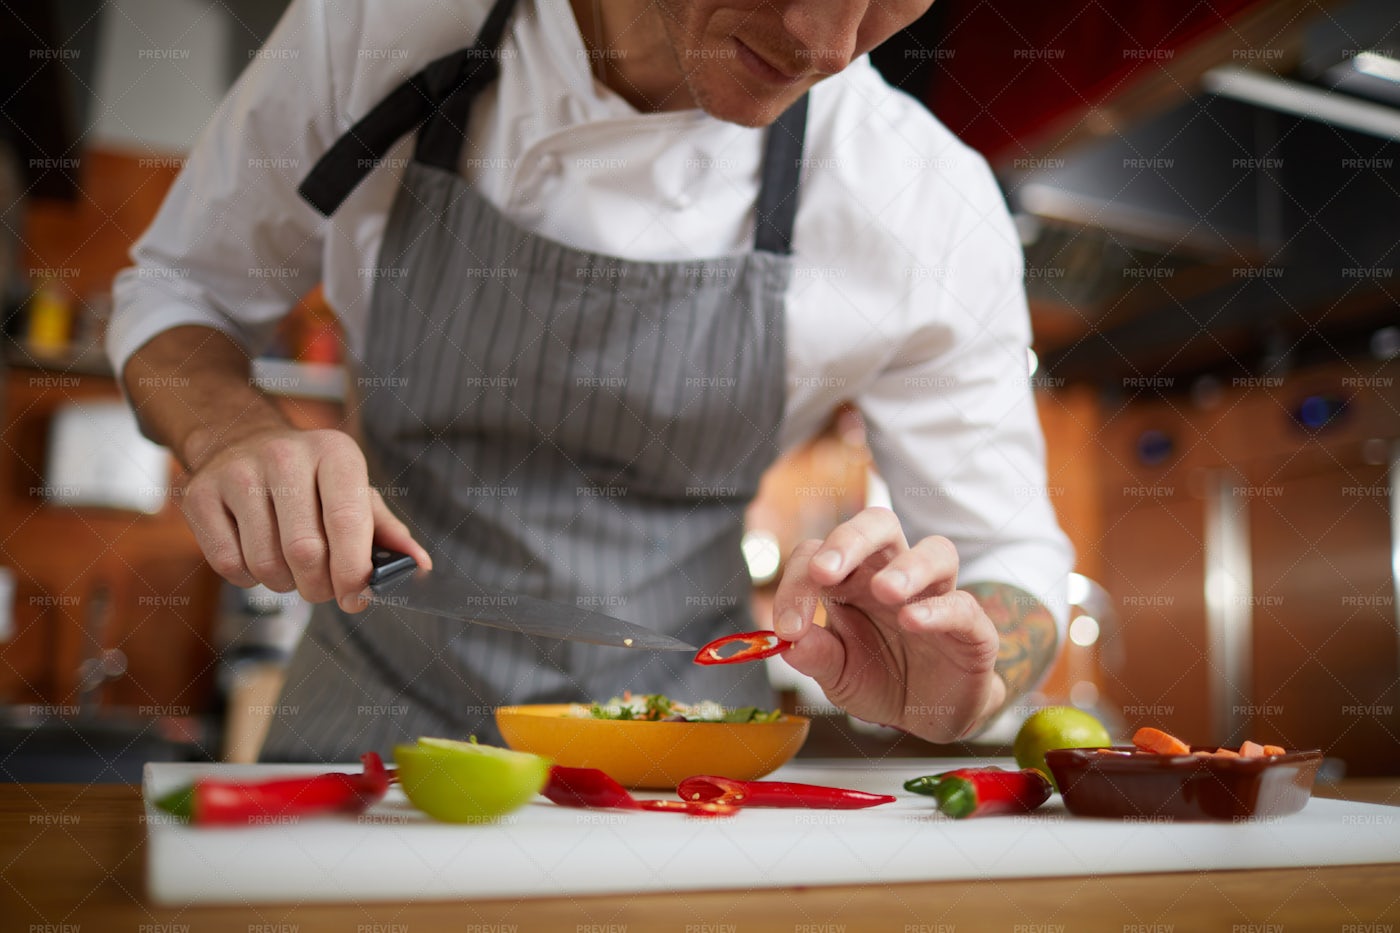 Professional Chef Serving Food: Stock Photos